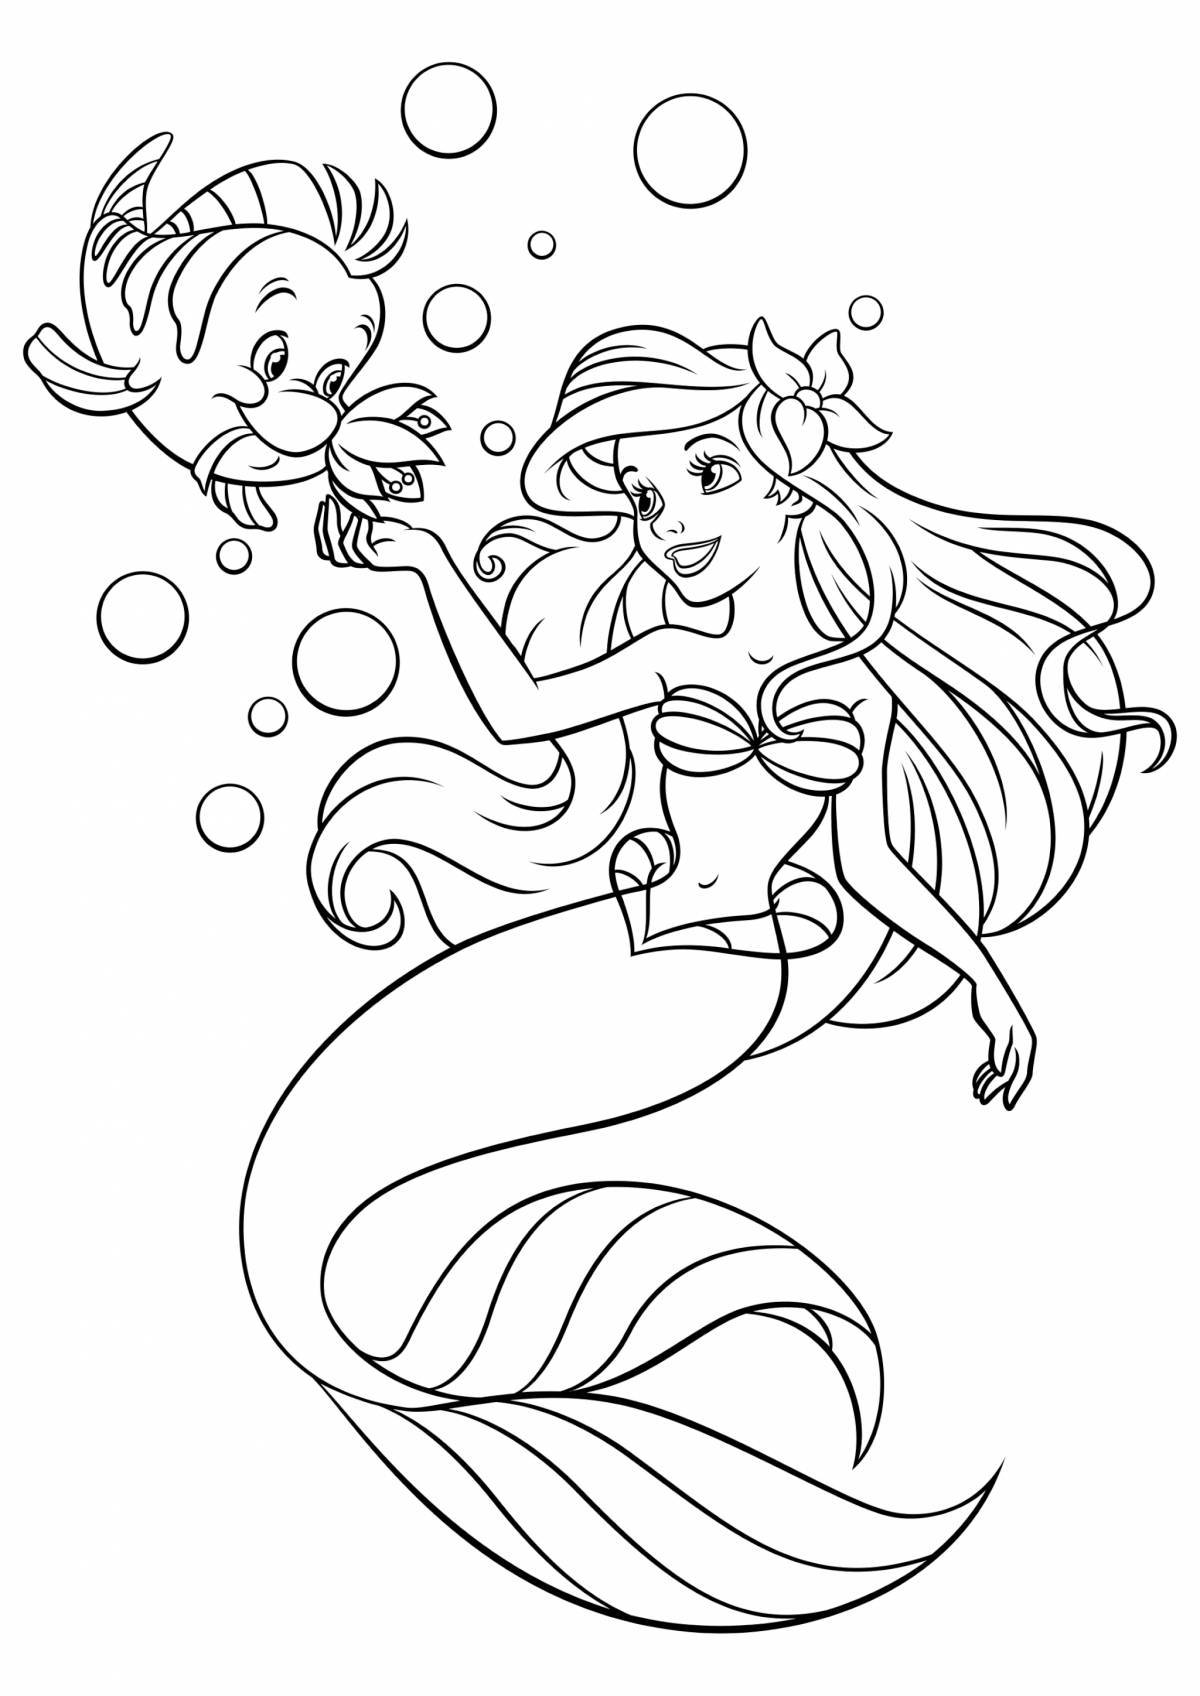 Coloring page gorgeous mermaid